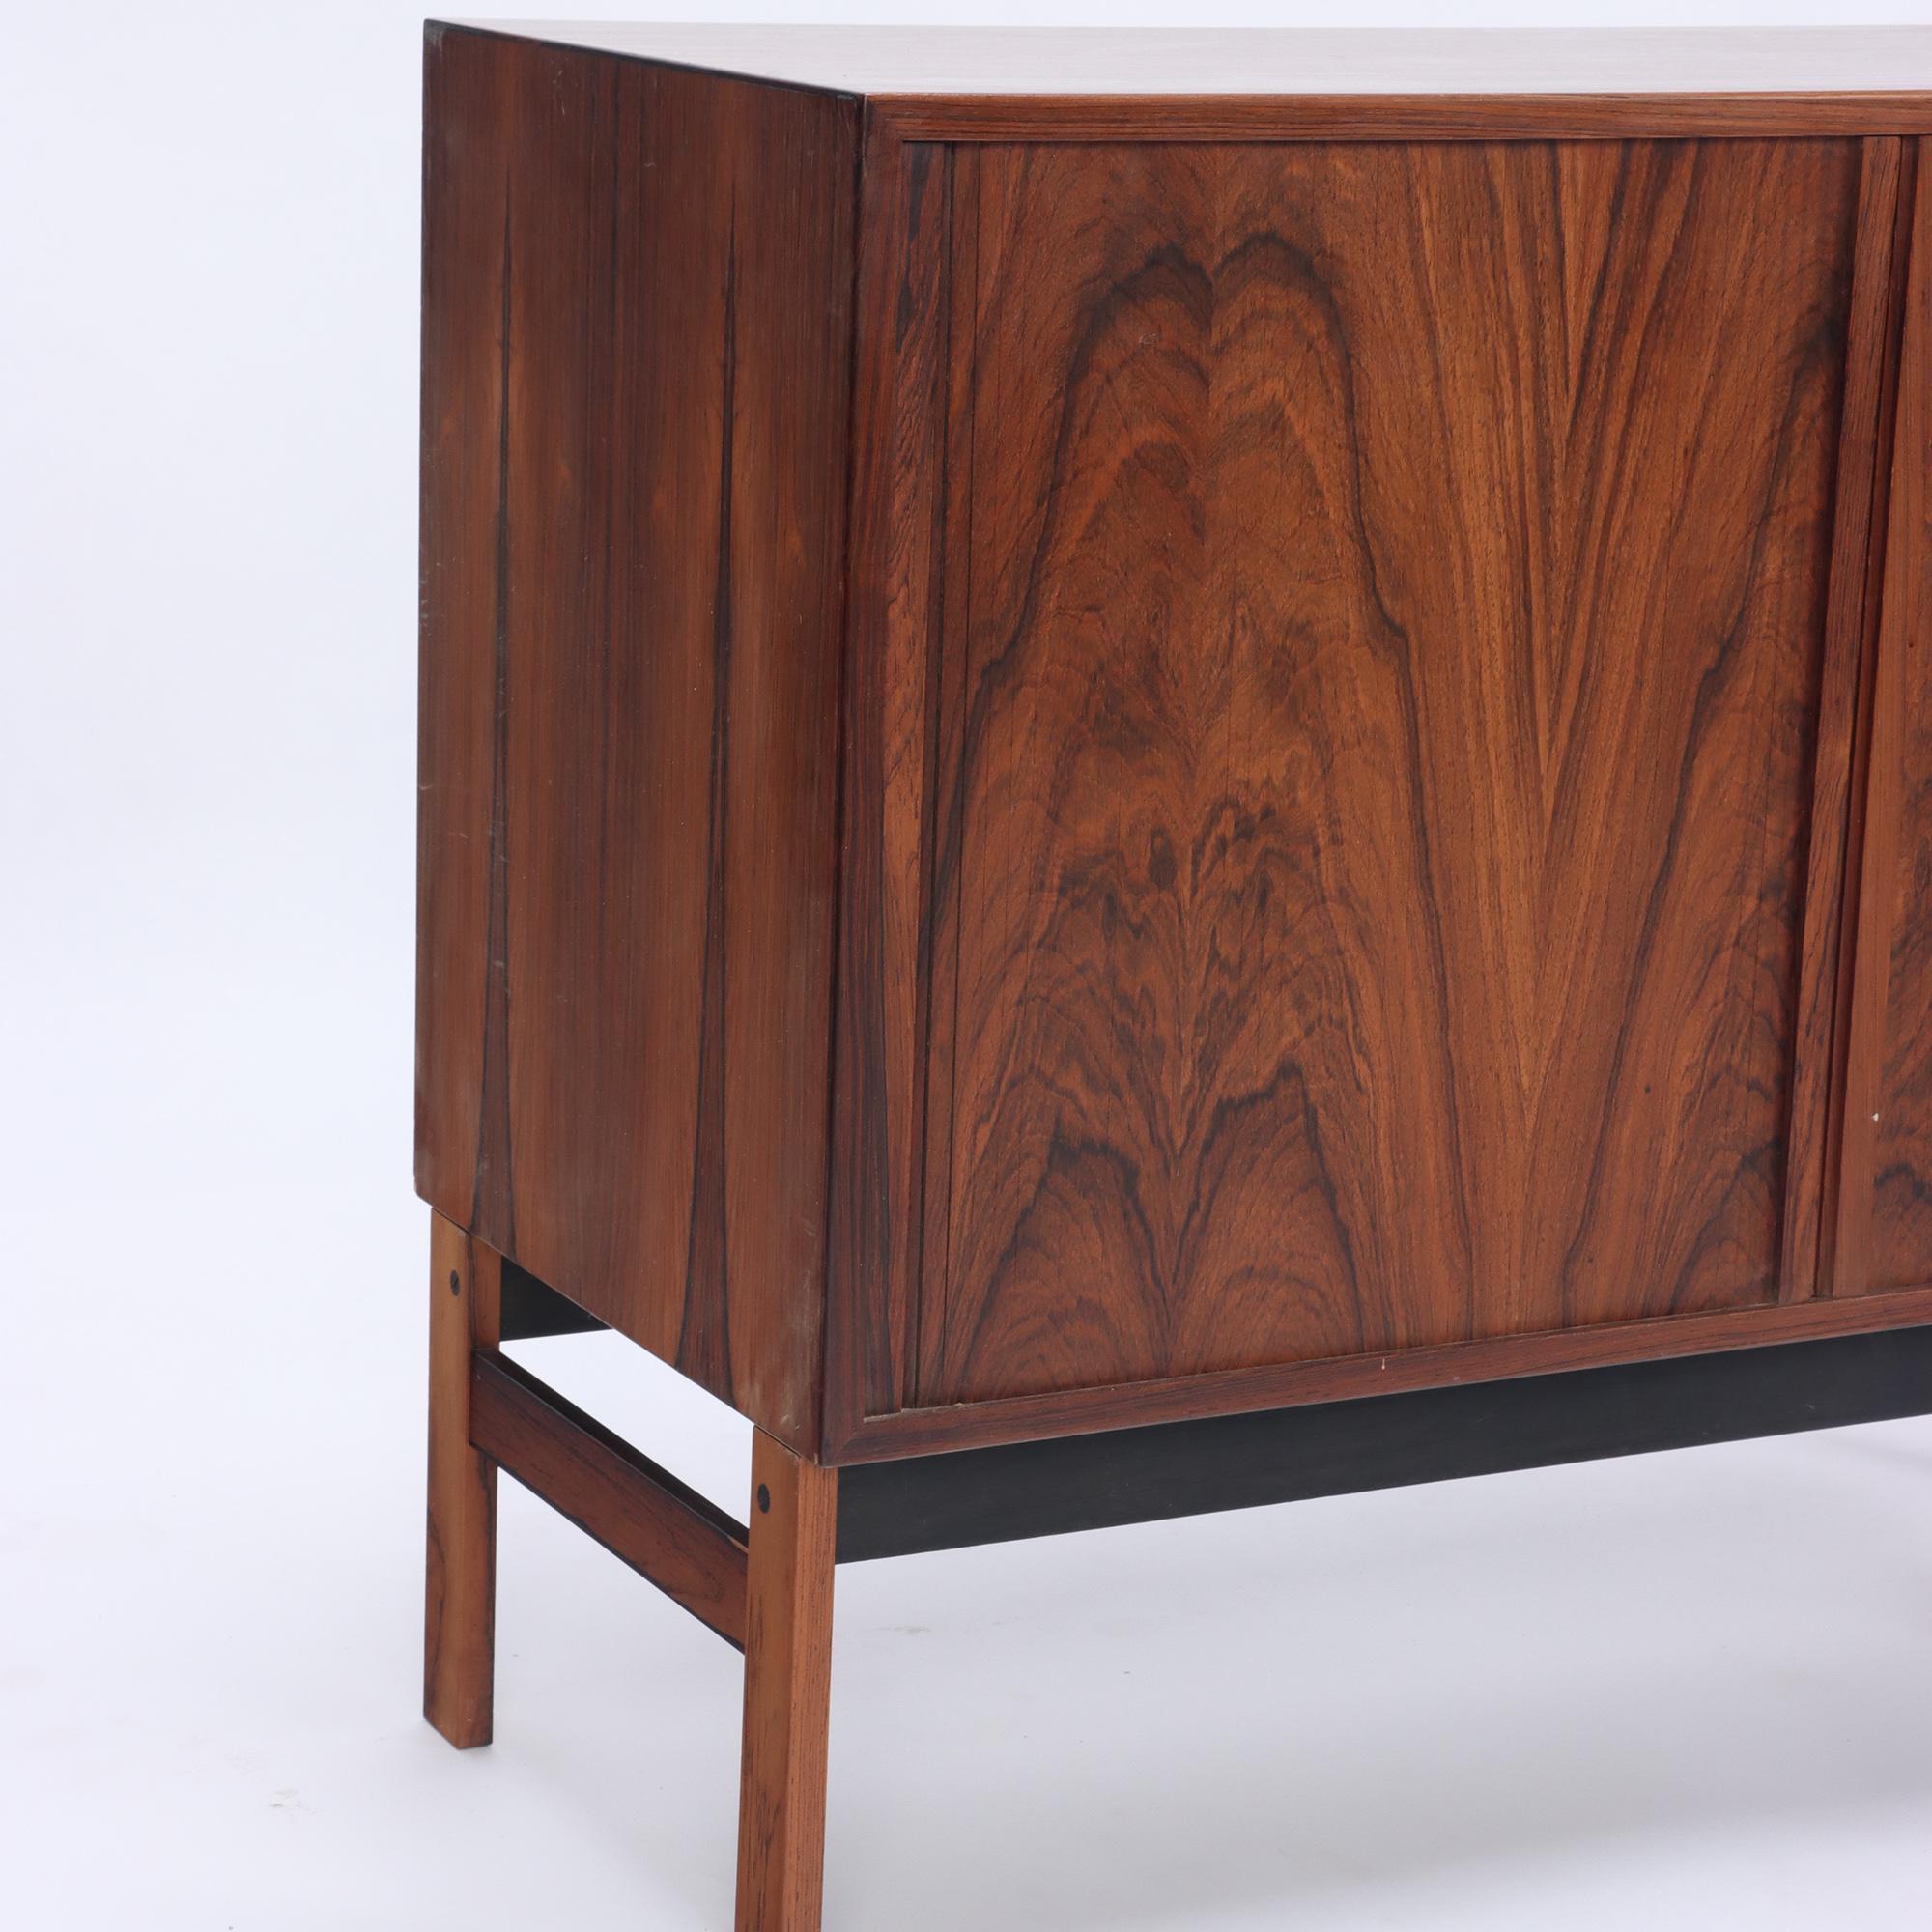 A Danish mid century rosewood media cabinet or small credenza having tambour doors and one interior shelf circa 1960. Labeled Danish Furniture Makers control.